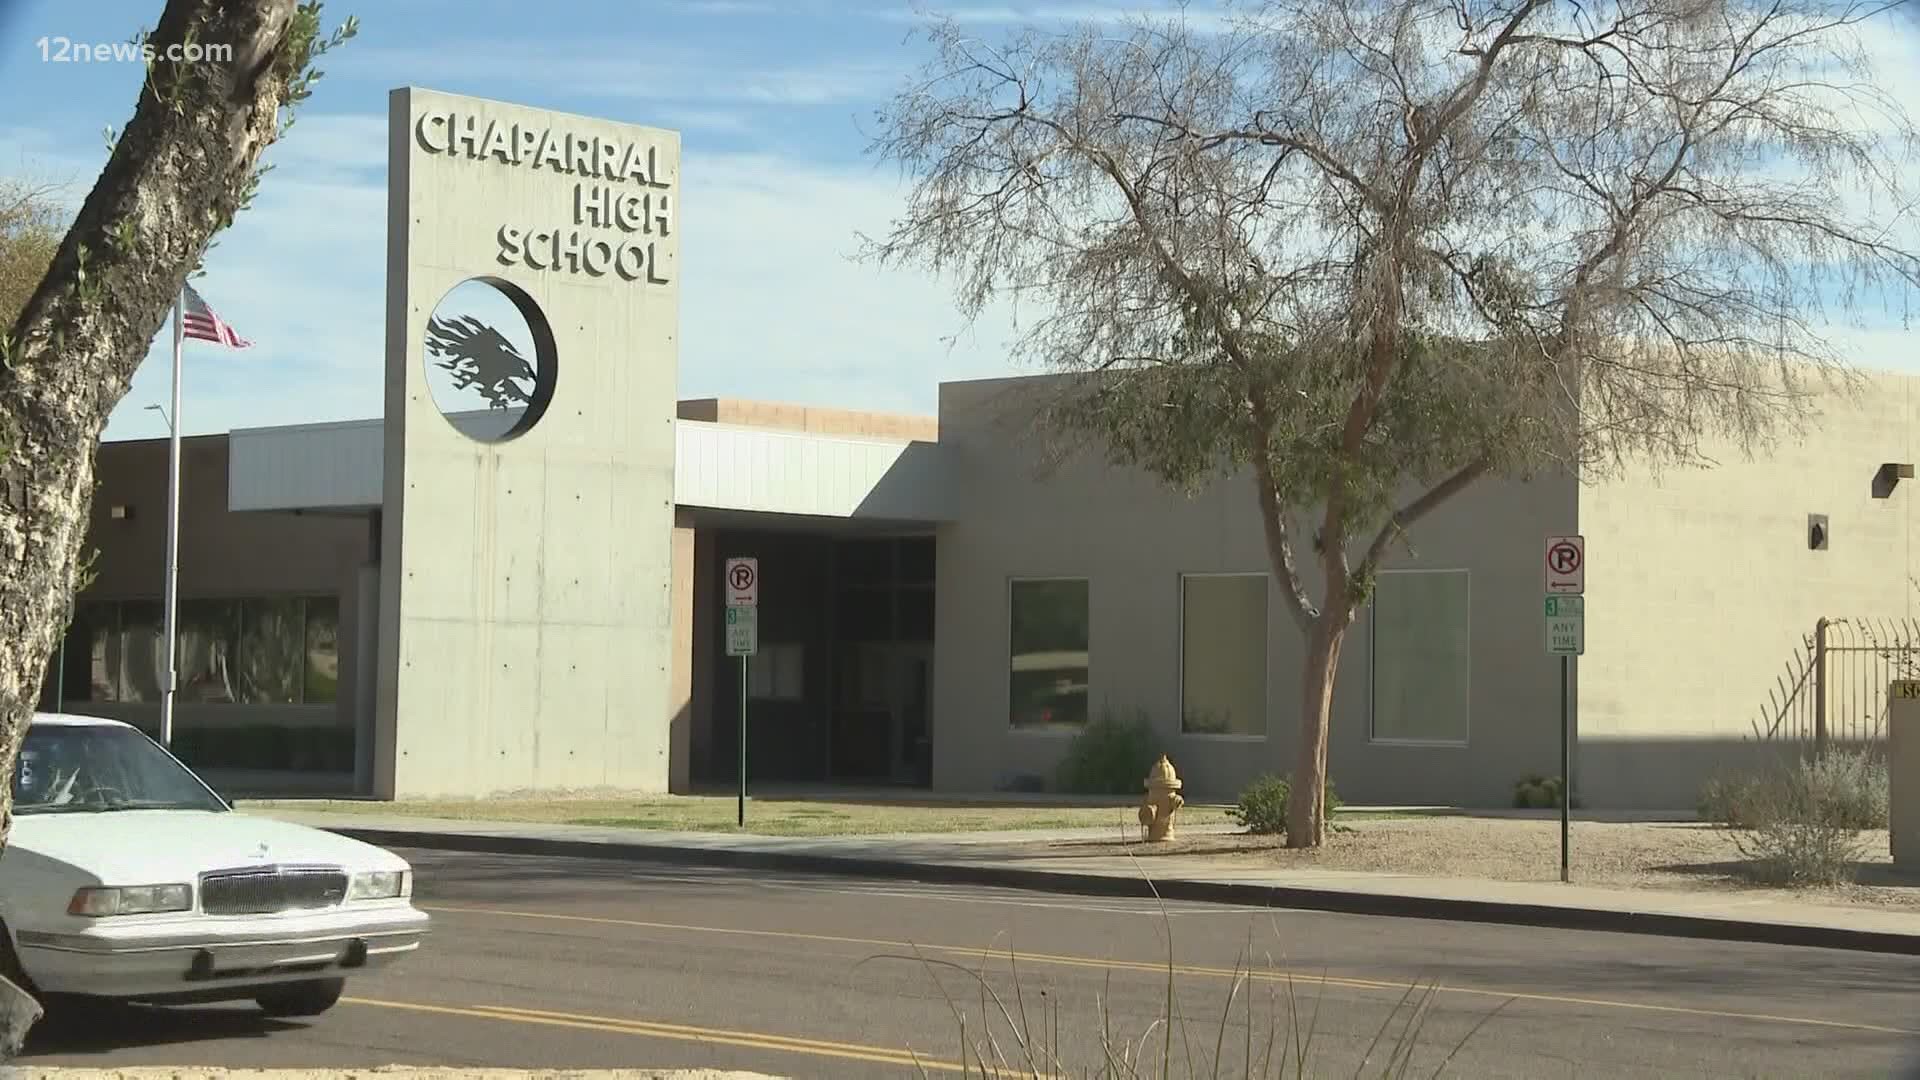 A Scottsdale Unified School District employee, Nicholas Claus, has been arrested on suspicion of sexually abusing a student. Claus is facing six charges.